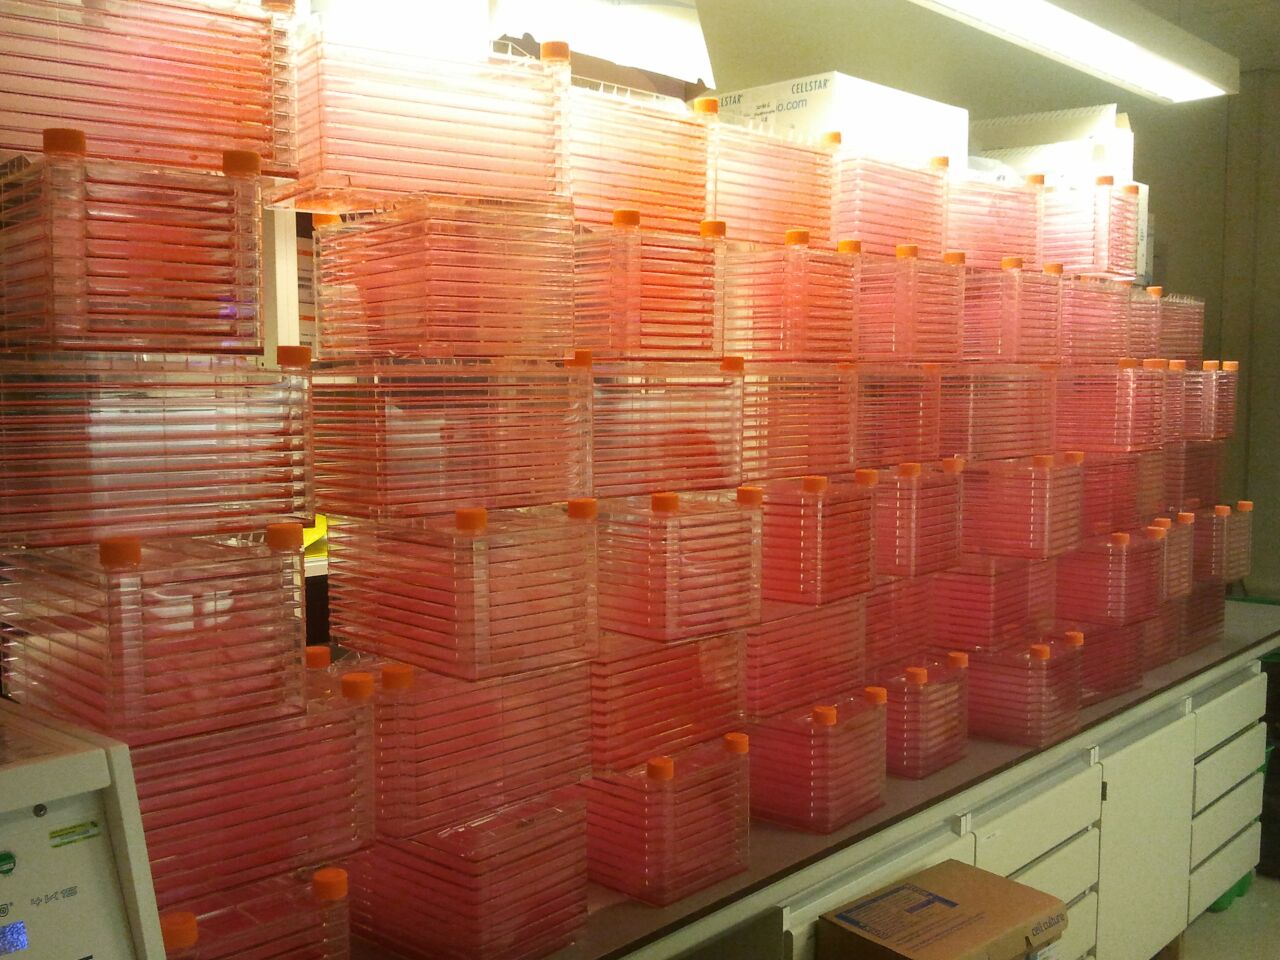 giant stacks of tissue culture flasks